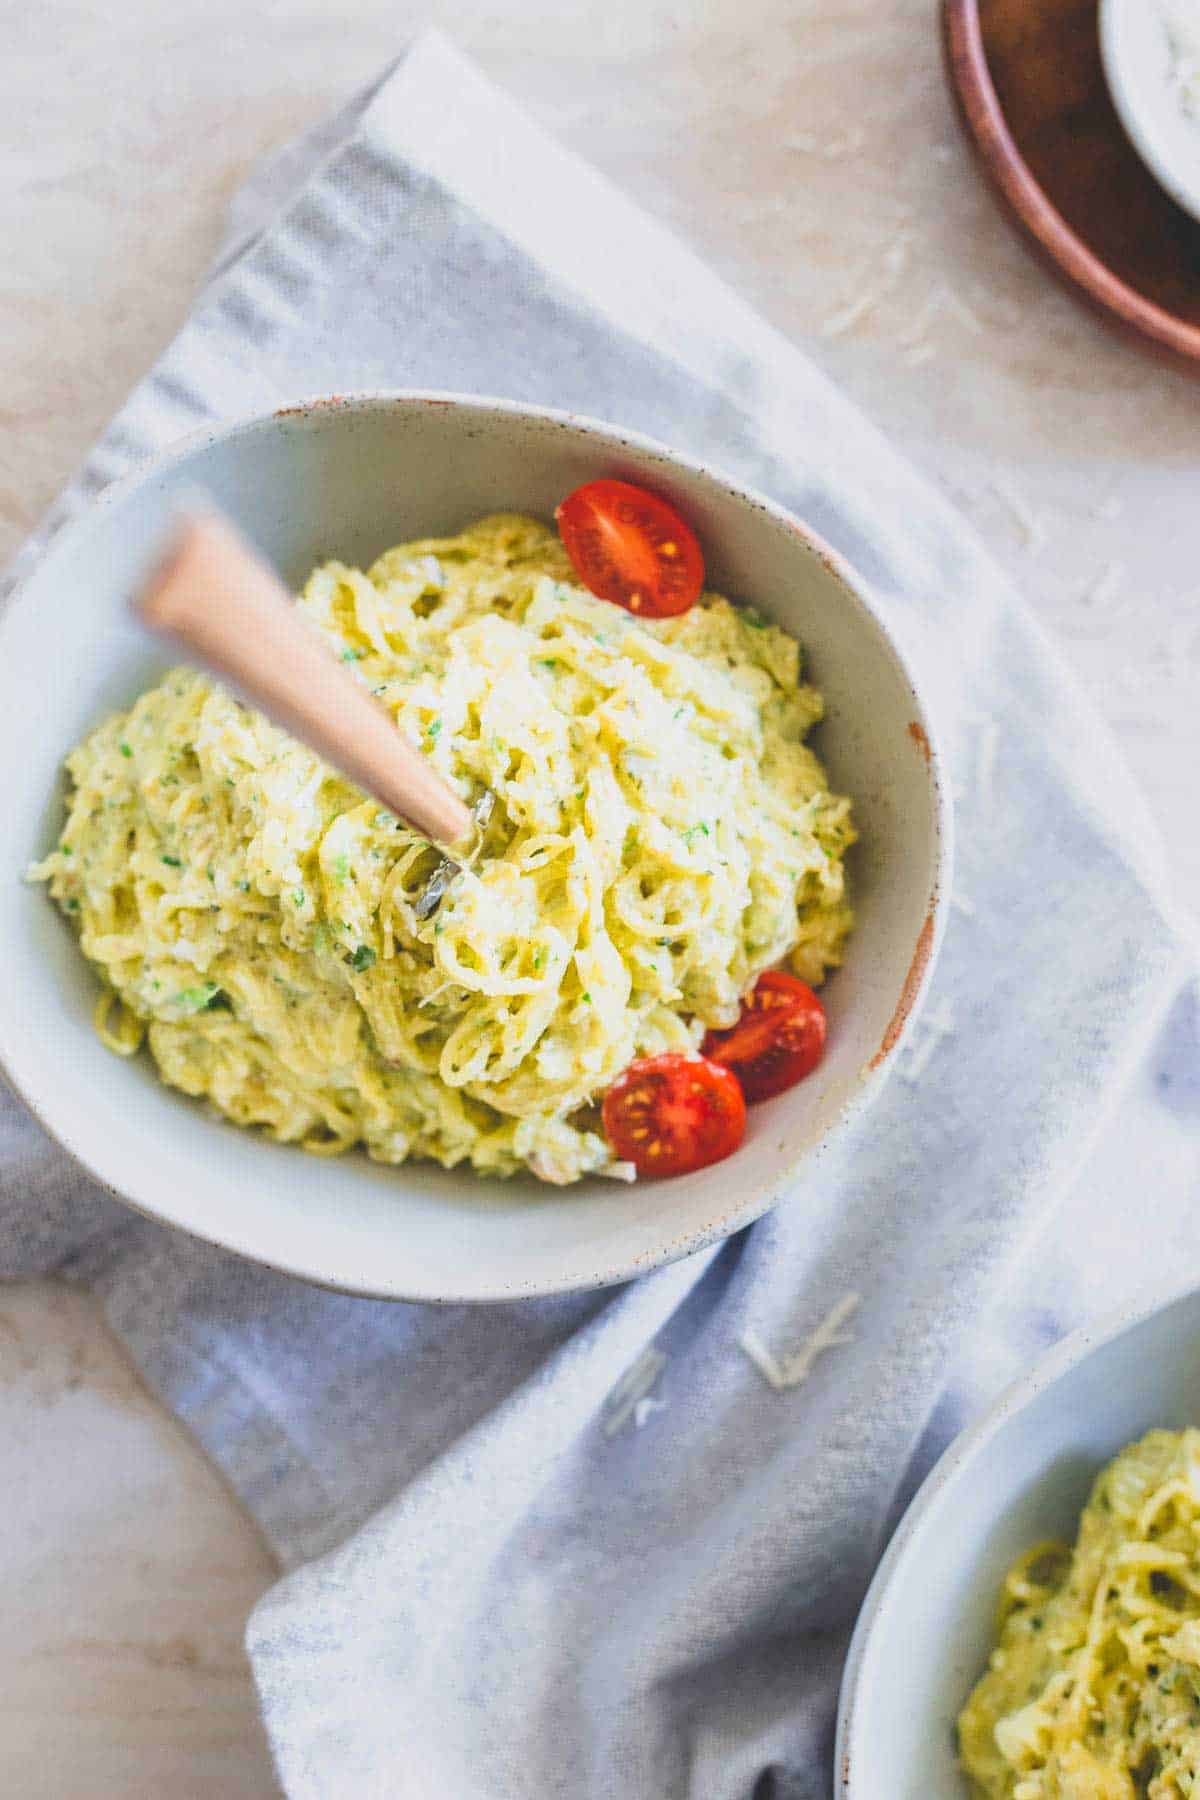 Pesto spaghetti squash noodles are mixed with creamy ricotta and cottage cheese for a healthy, indulgent faux-pasta dinner.